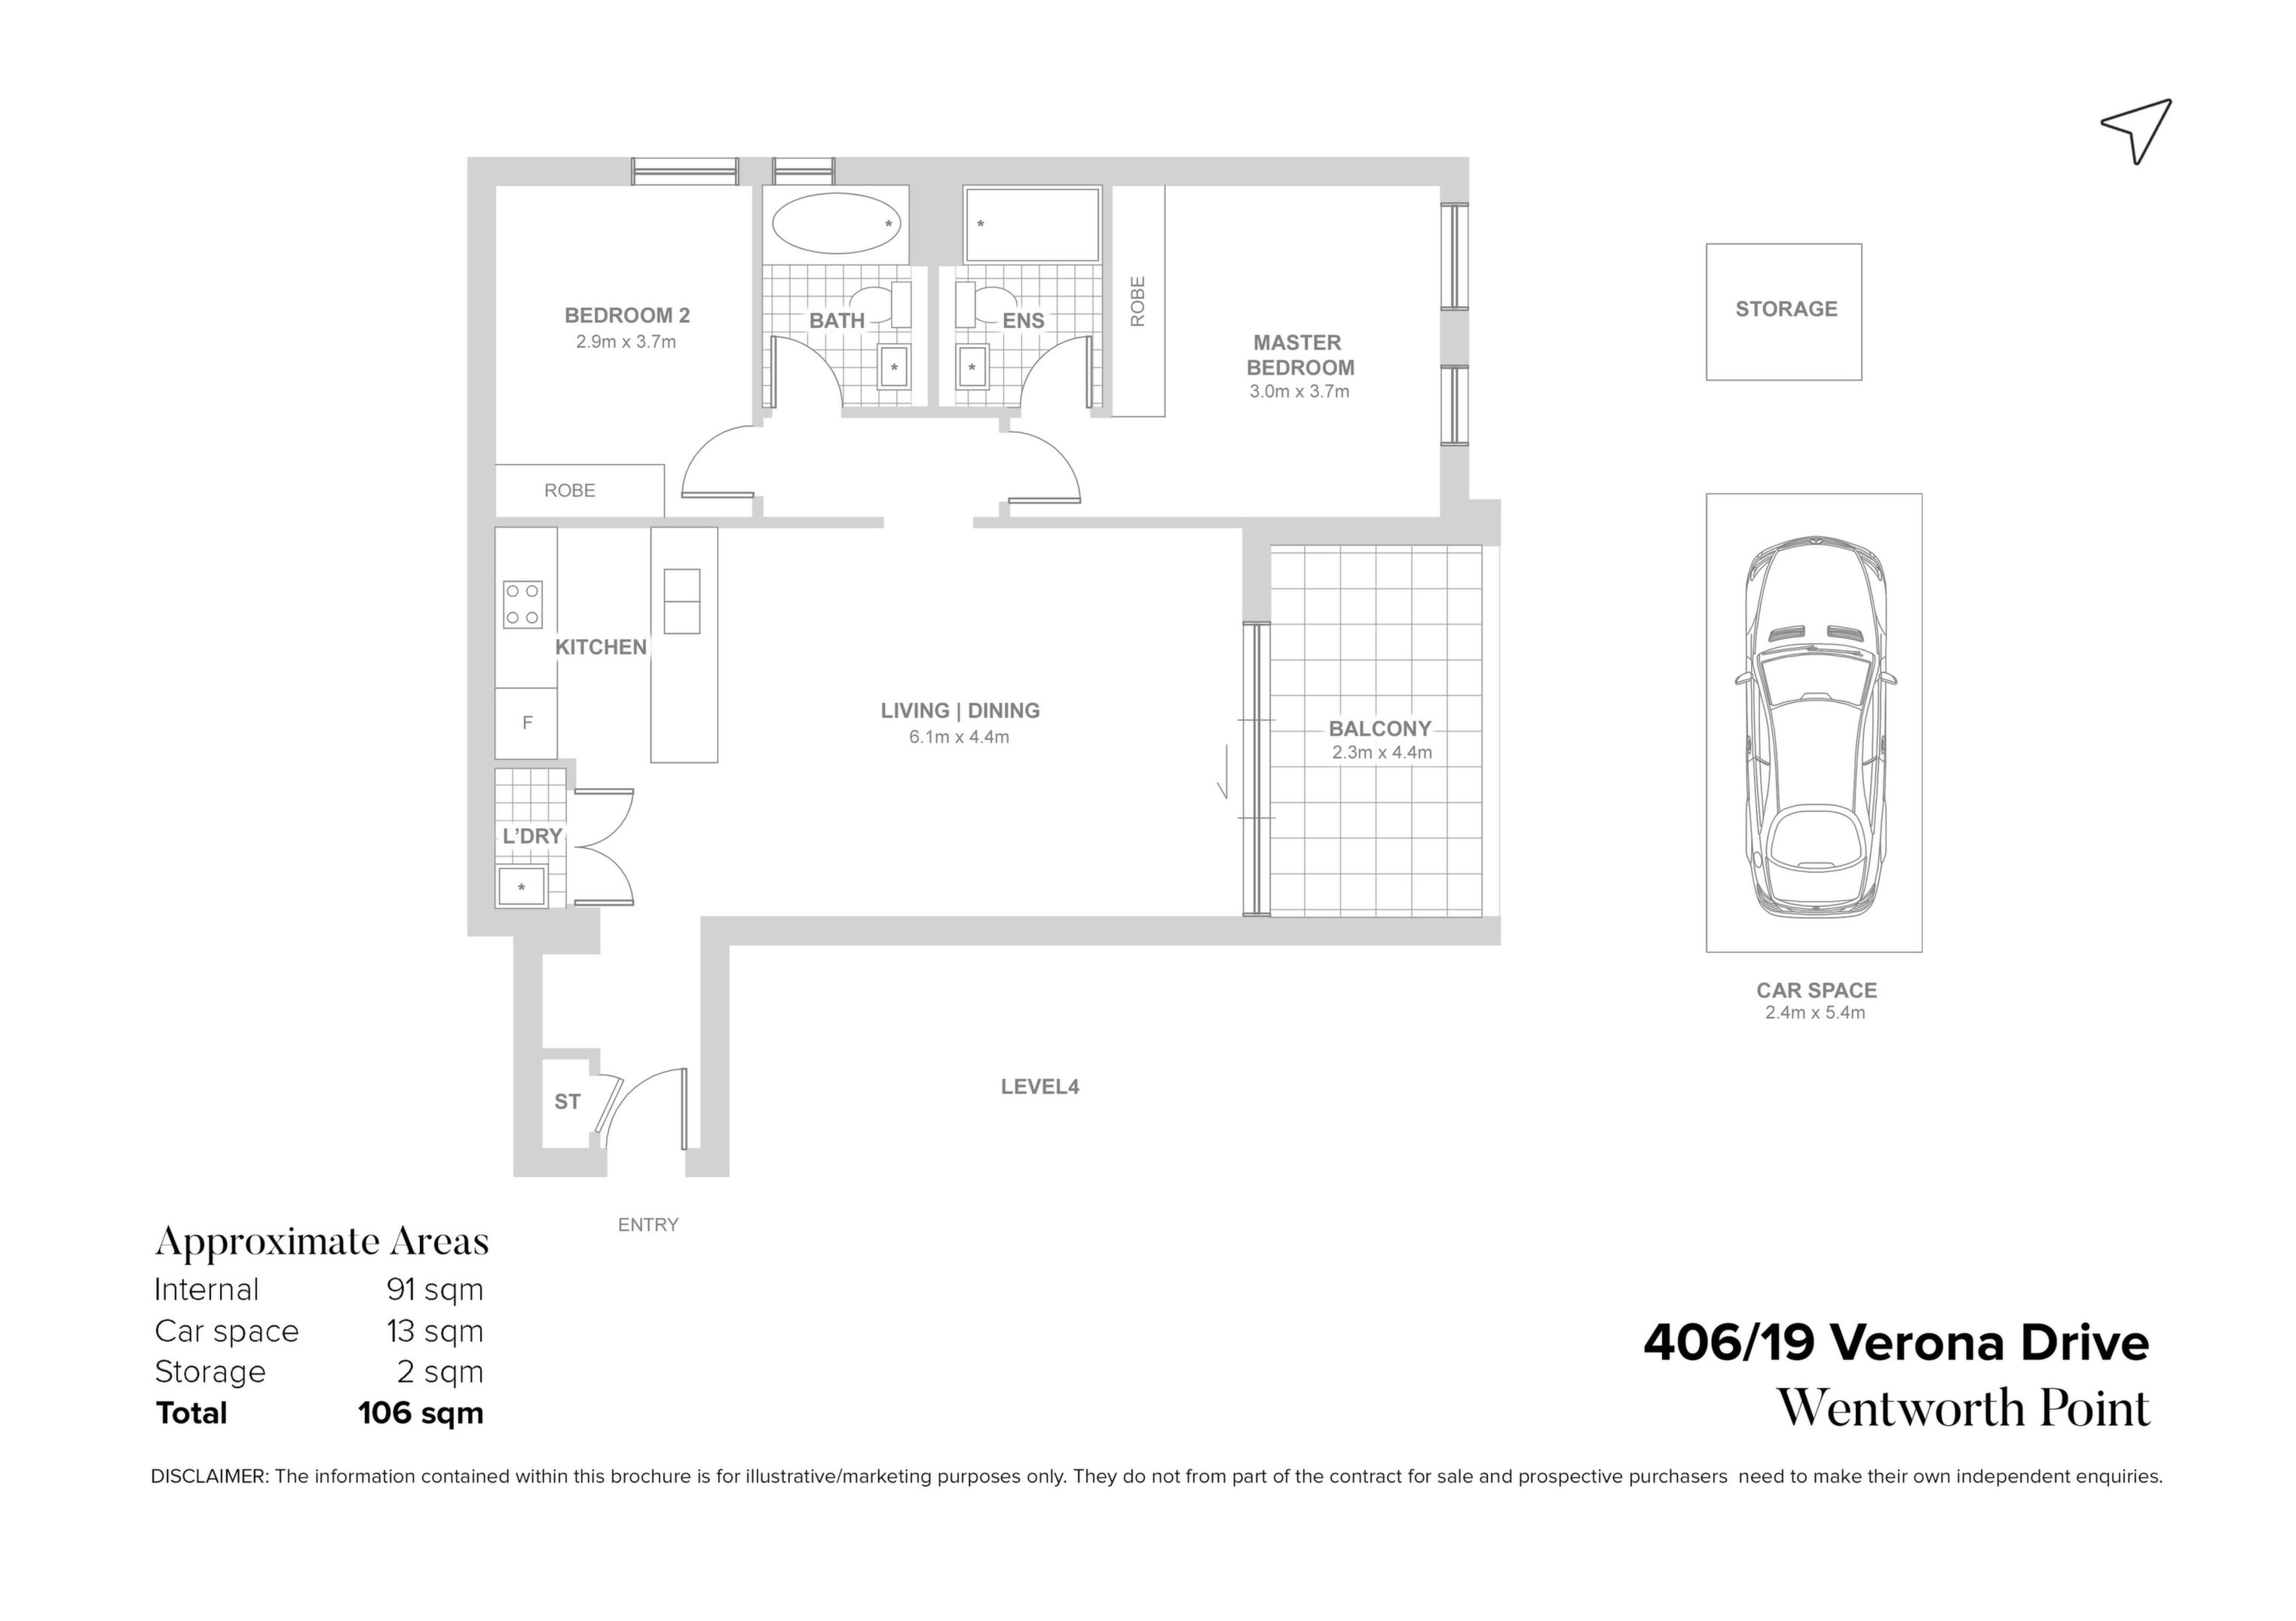 406/19 Verona Drive, Wentworth Point Sold by Chidiac Realty - floorplan